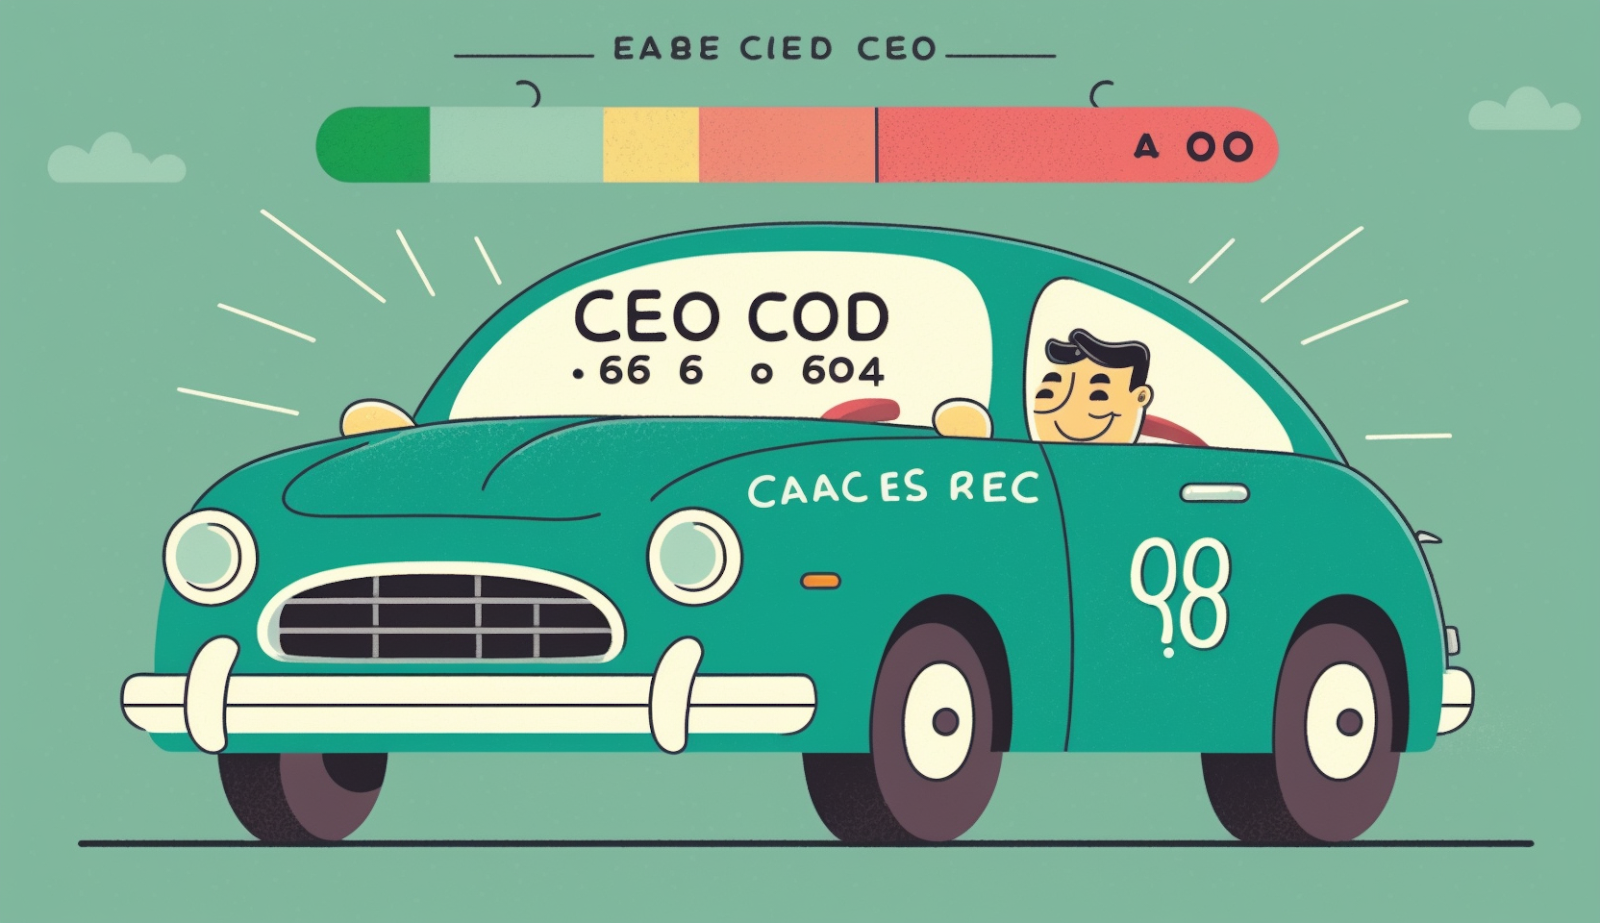 What Credit Score Do You Need to Lease a Car?